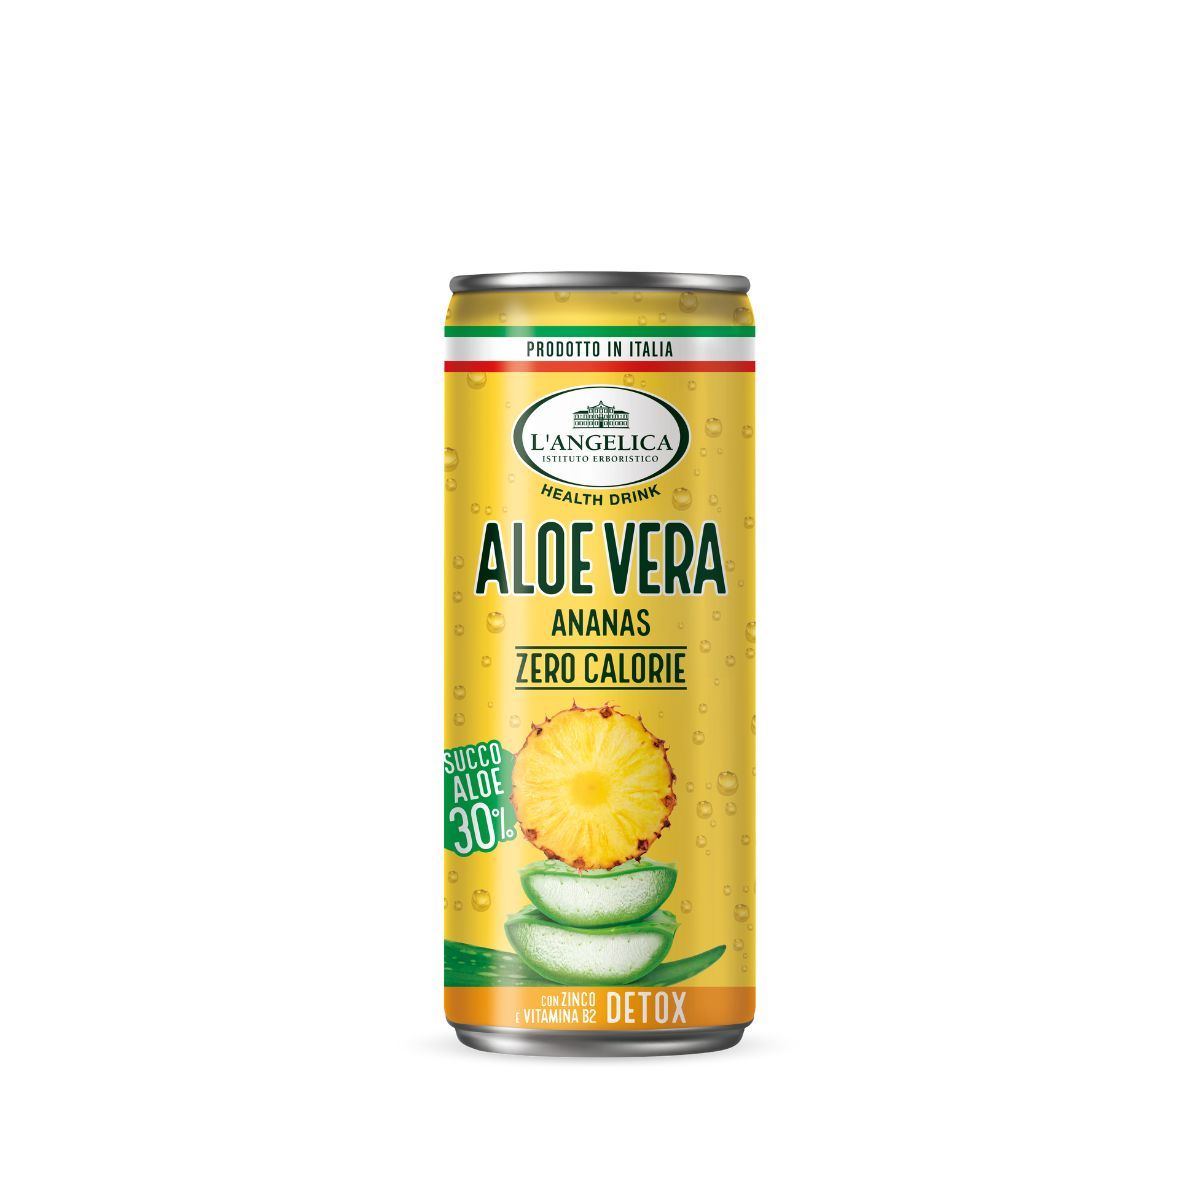 Drink Aloe Vera 30% in cans - Pineapple